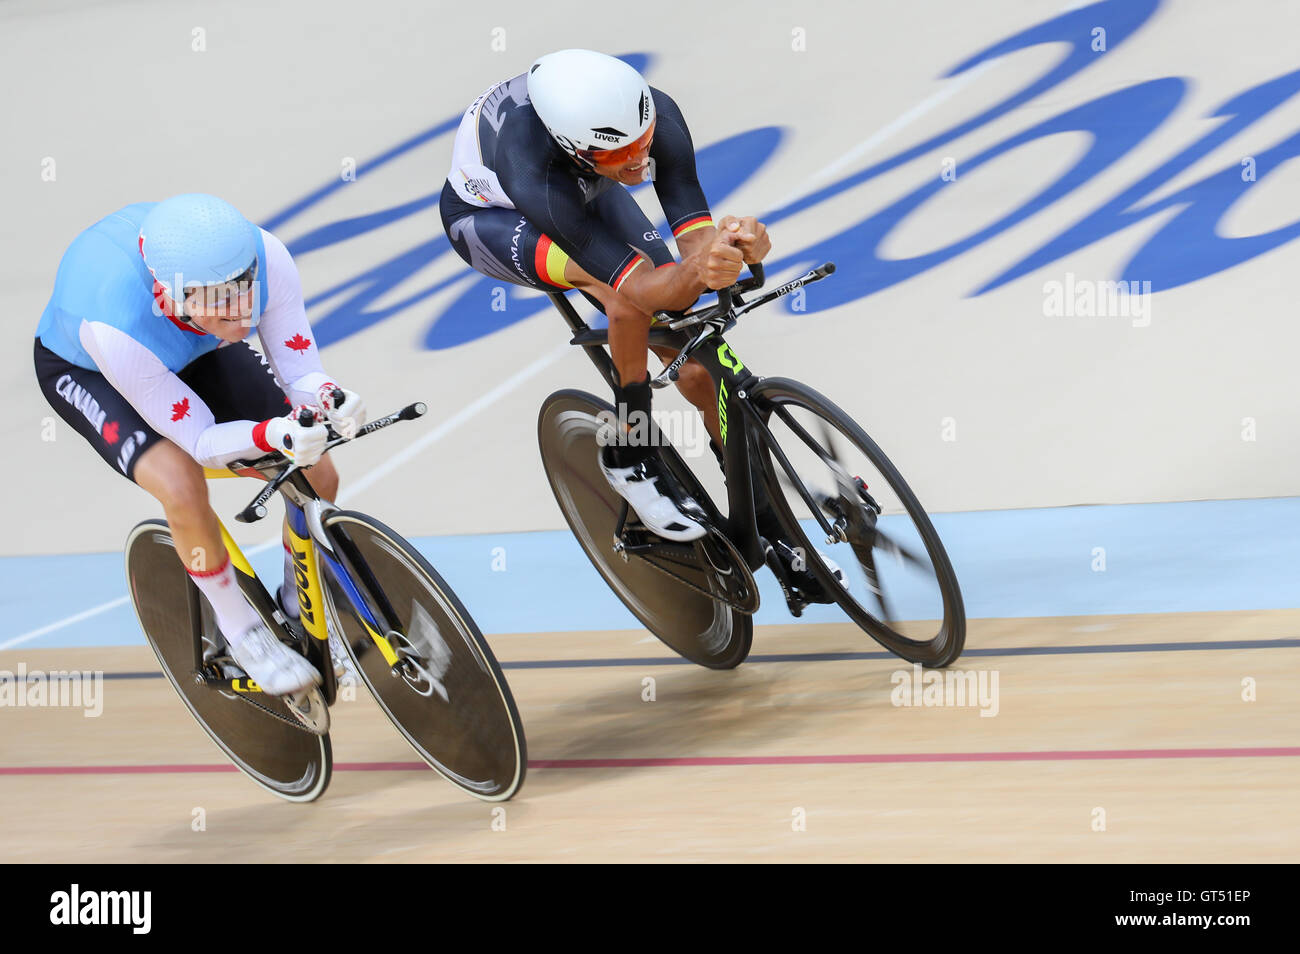 Rio de Janeiro, Brazil. 9th September, 2016.  Cyclist Michael Teuber (R) of Germany and Ross Wilson of Canada compete the Cycling Track - Men's C1 3000M Individual Pursuit Qualification of the Rio 2016 Paralympic Games, Rio de Janeiro, Brazil, 09 September 2016. Photo: Kay Nietfeld/dpa/Alamy Live News Stock Photo